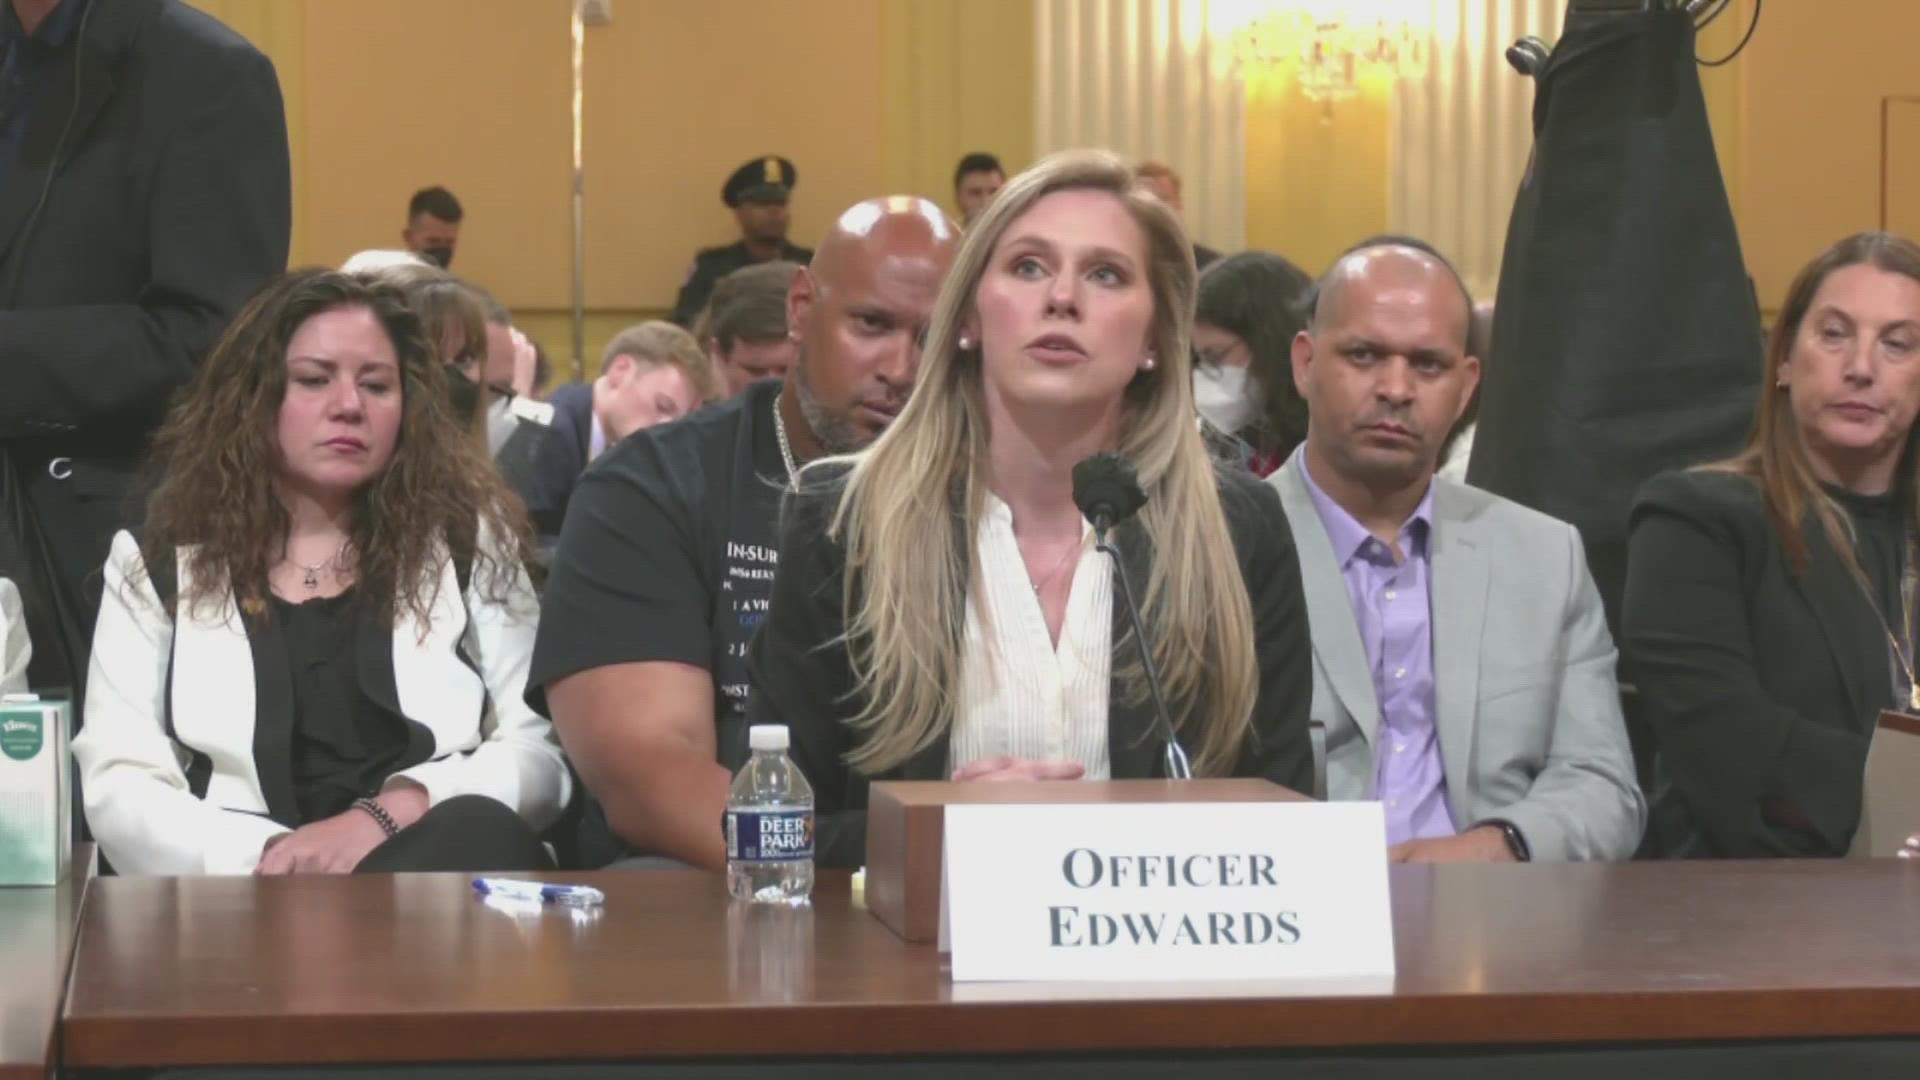 Officer Caroline Edwards said she was knocked unconscious, pepper sprayed and tear gassed while defending the Capitol during the Jan. 6 attack.